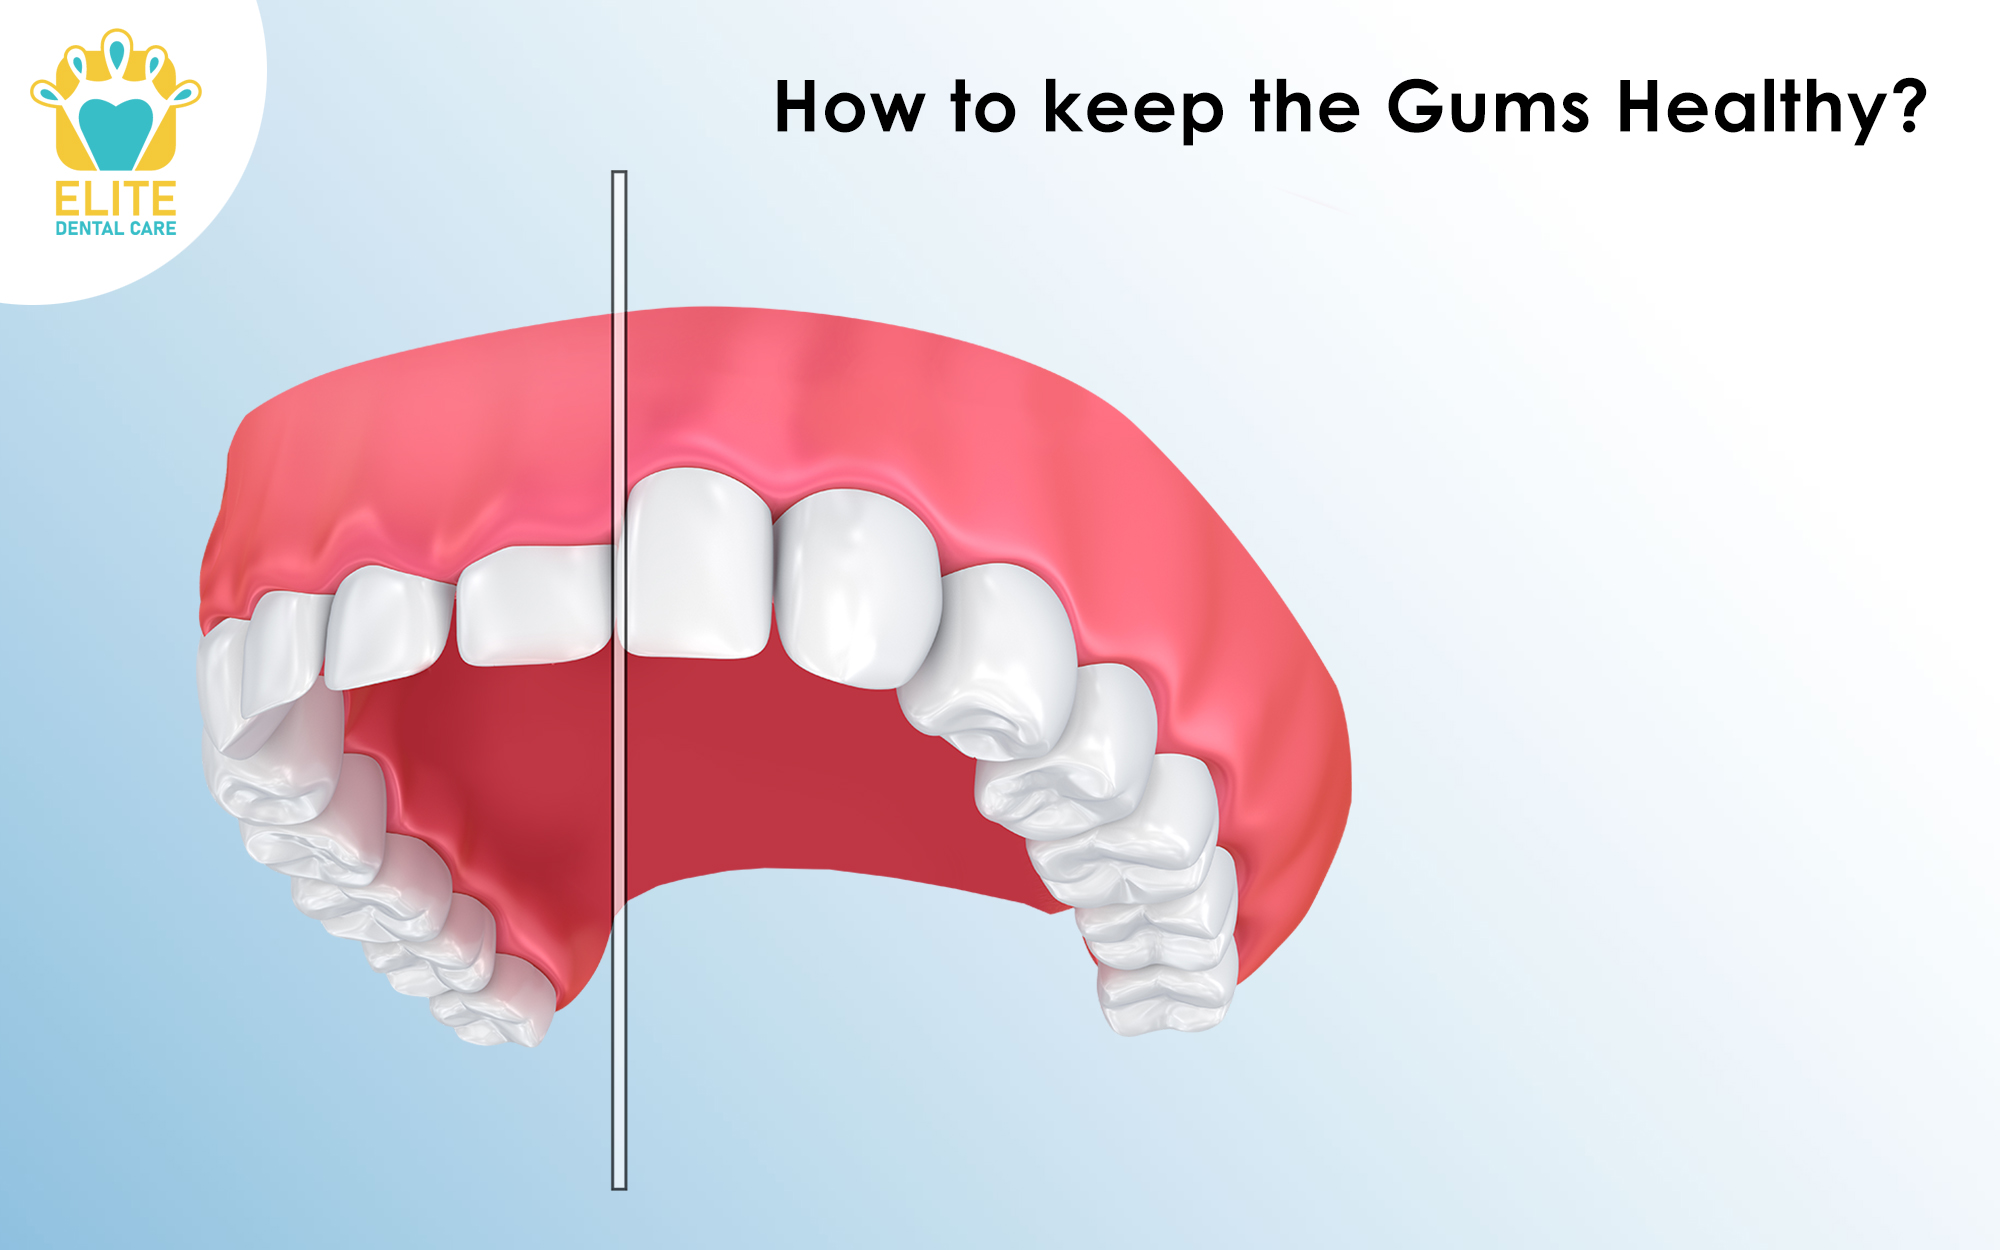 HOW TO KEEP THE GUMS HEALTHY